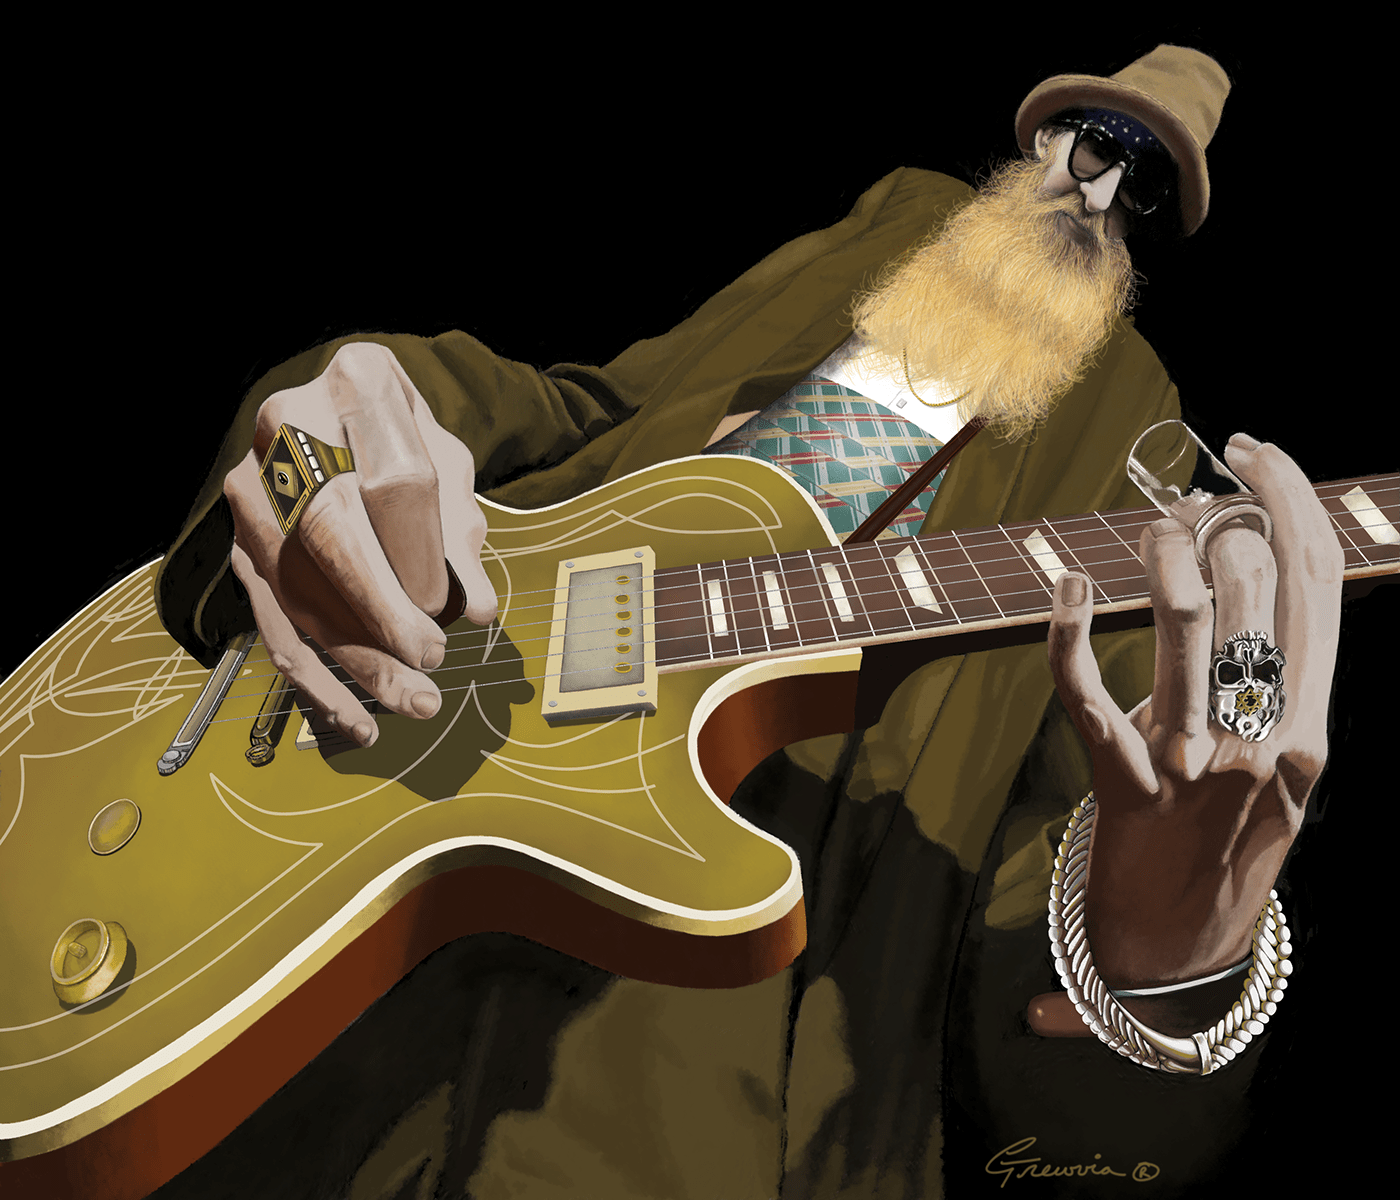 Billy Gibbons digital painting caricature. Digital Painting Adobe Photoshop.